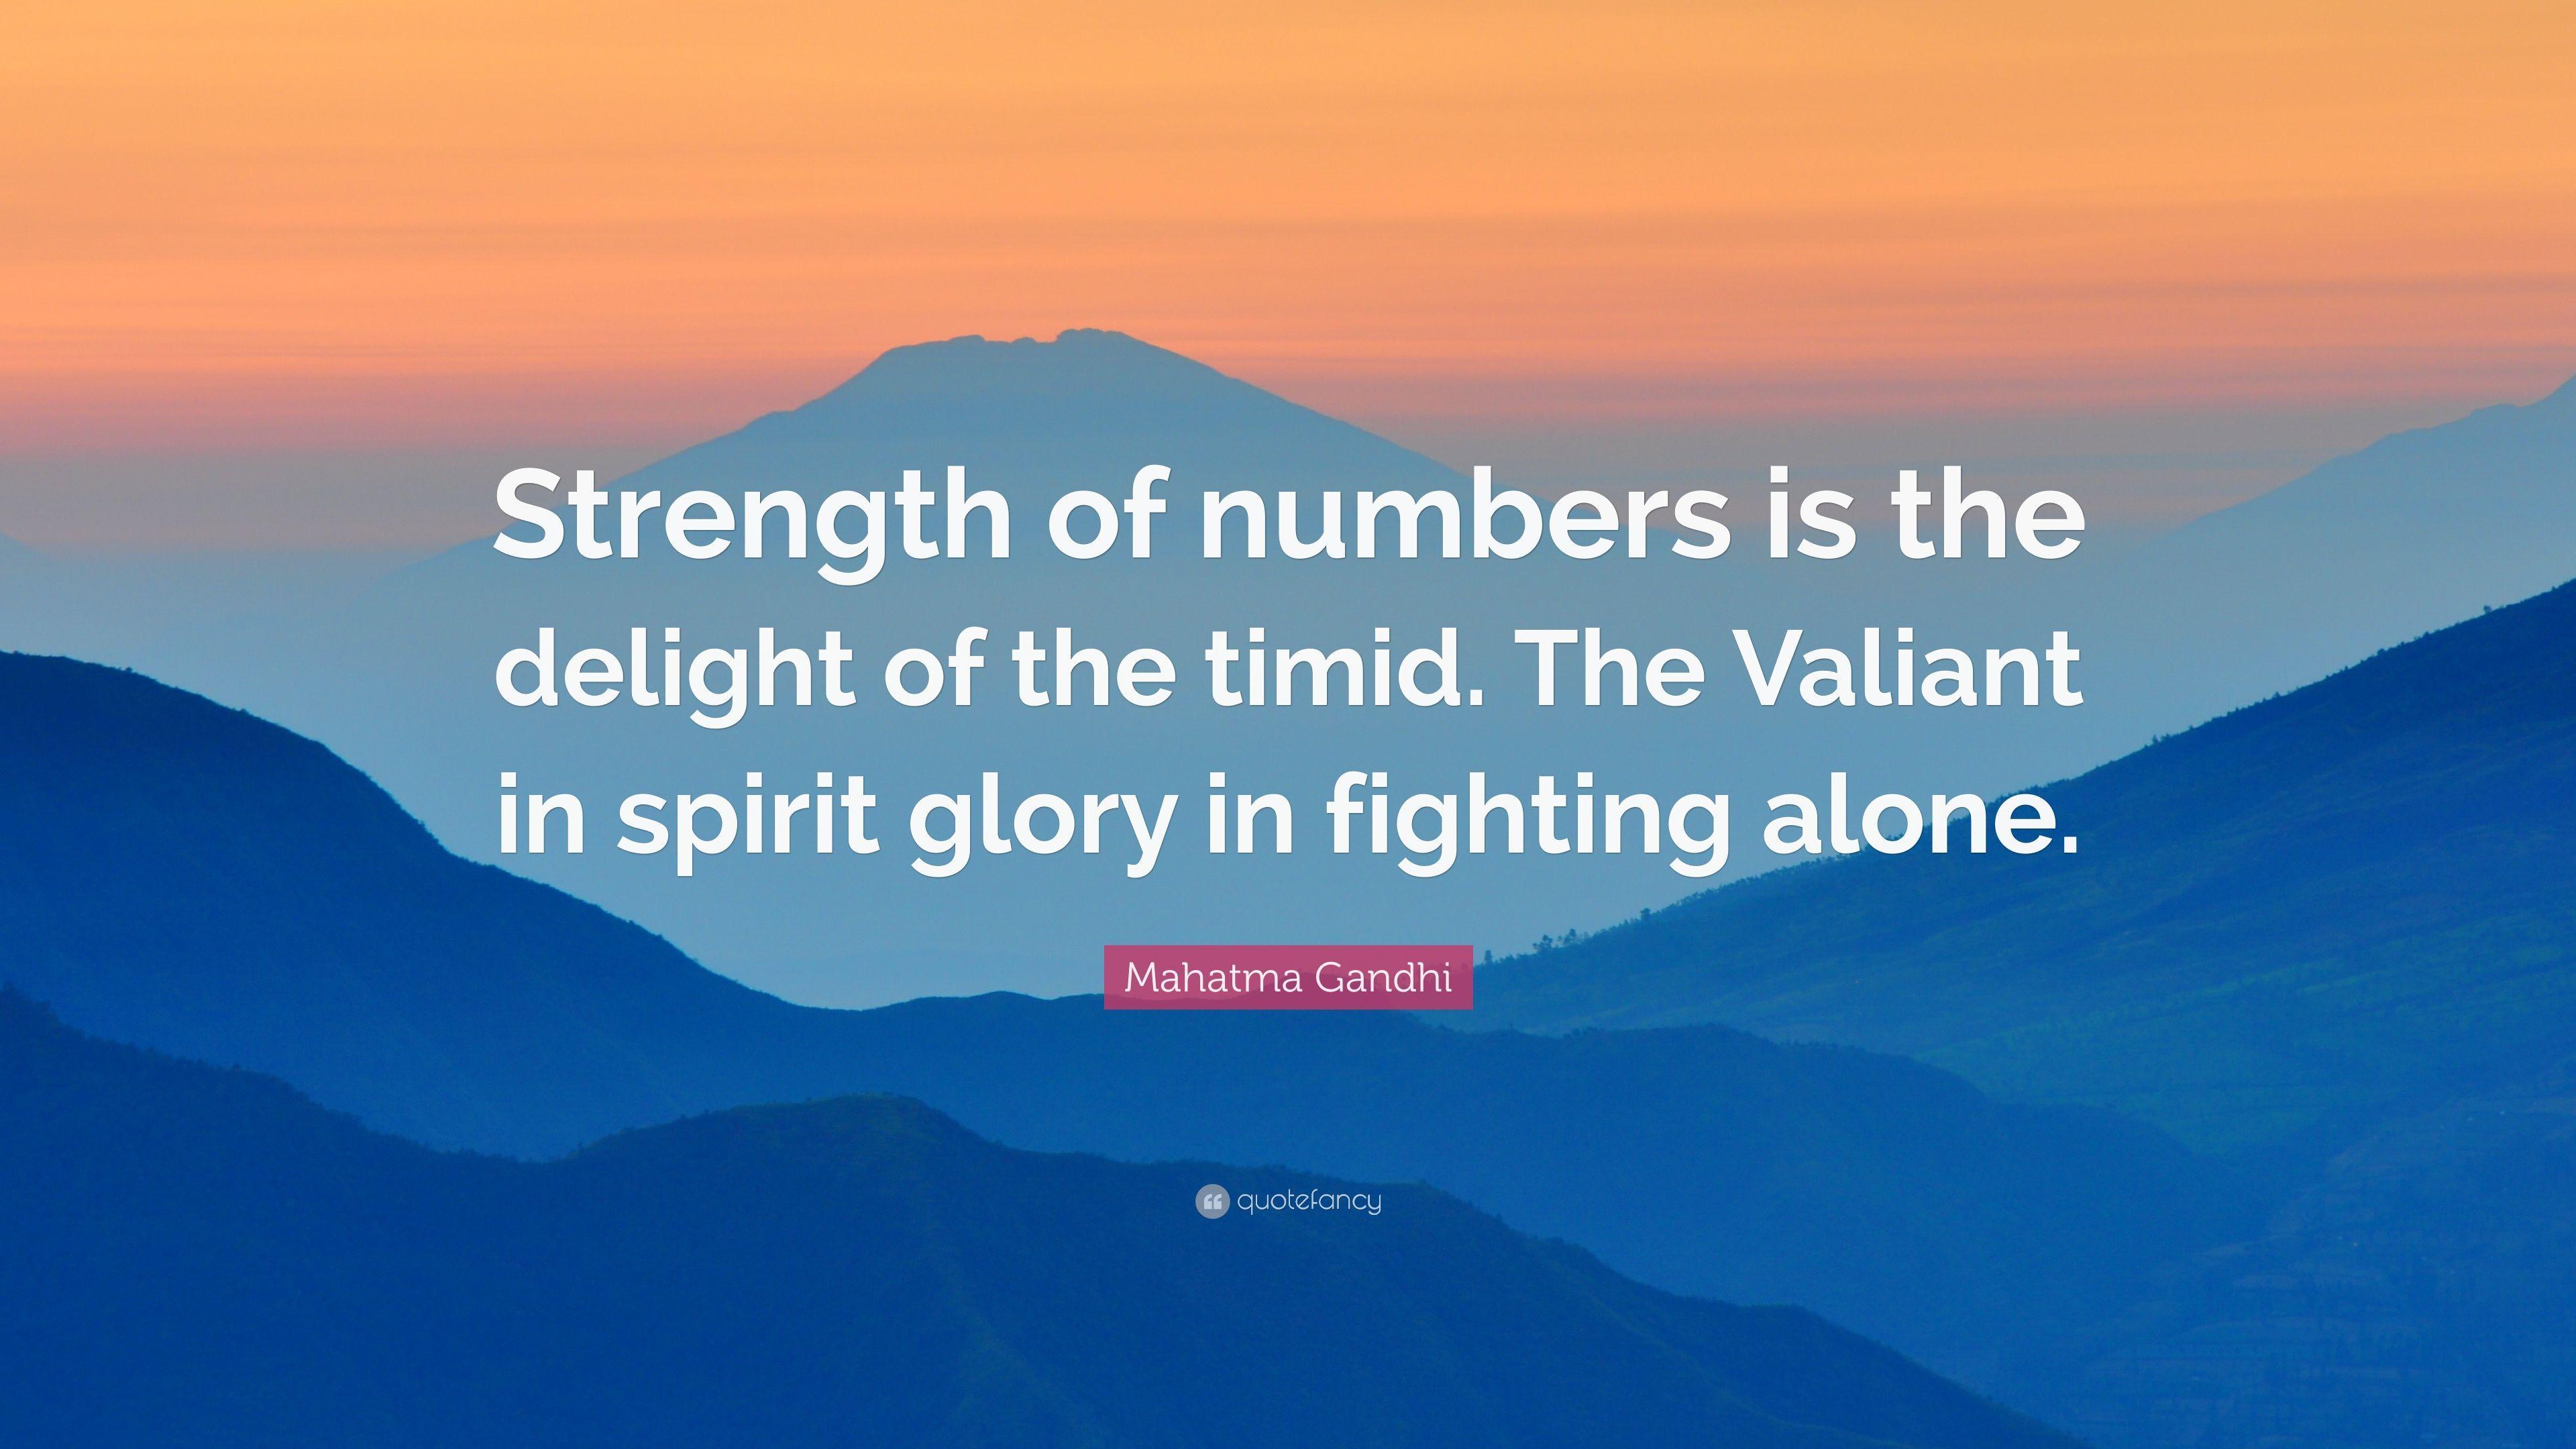 Mahatma Gandhi Quote: “Strength of numbers is the delight